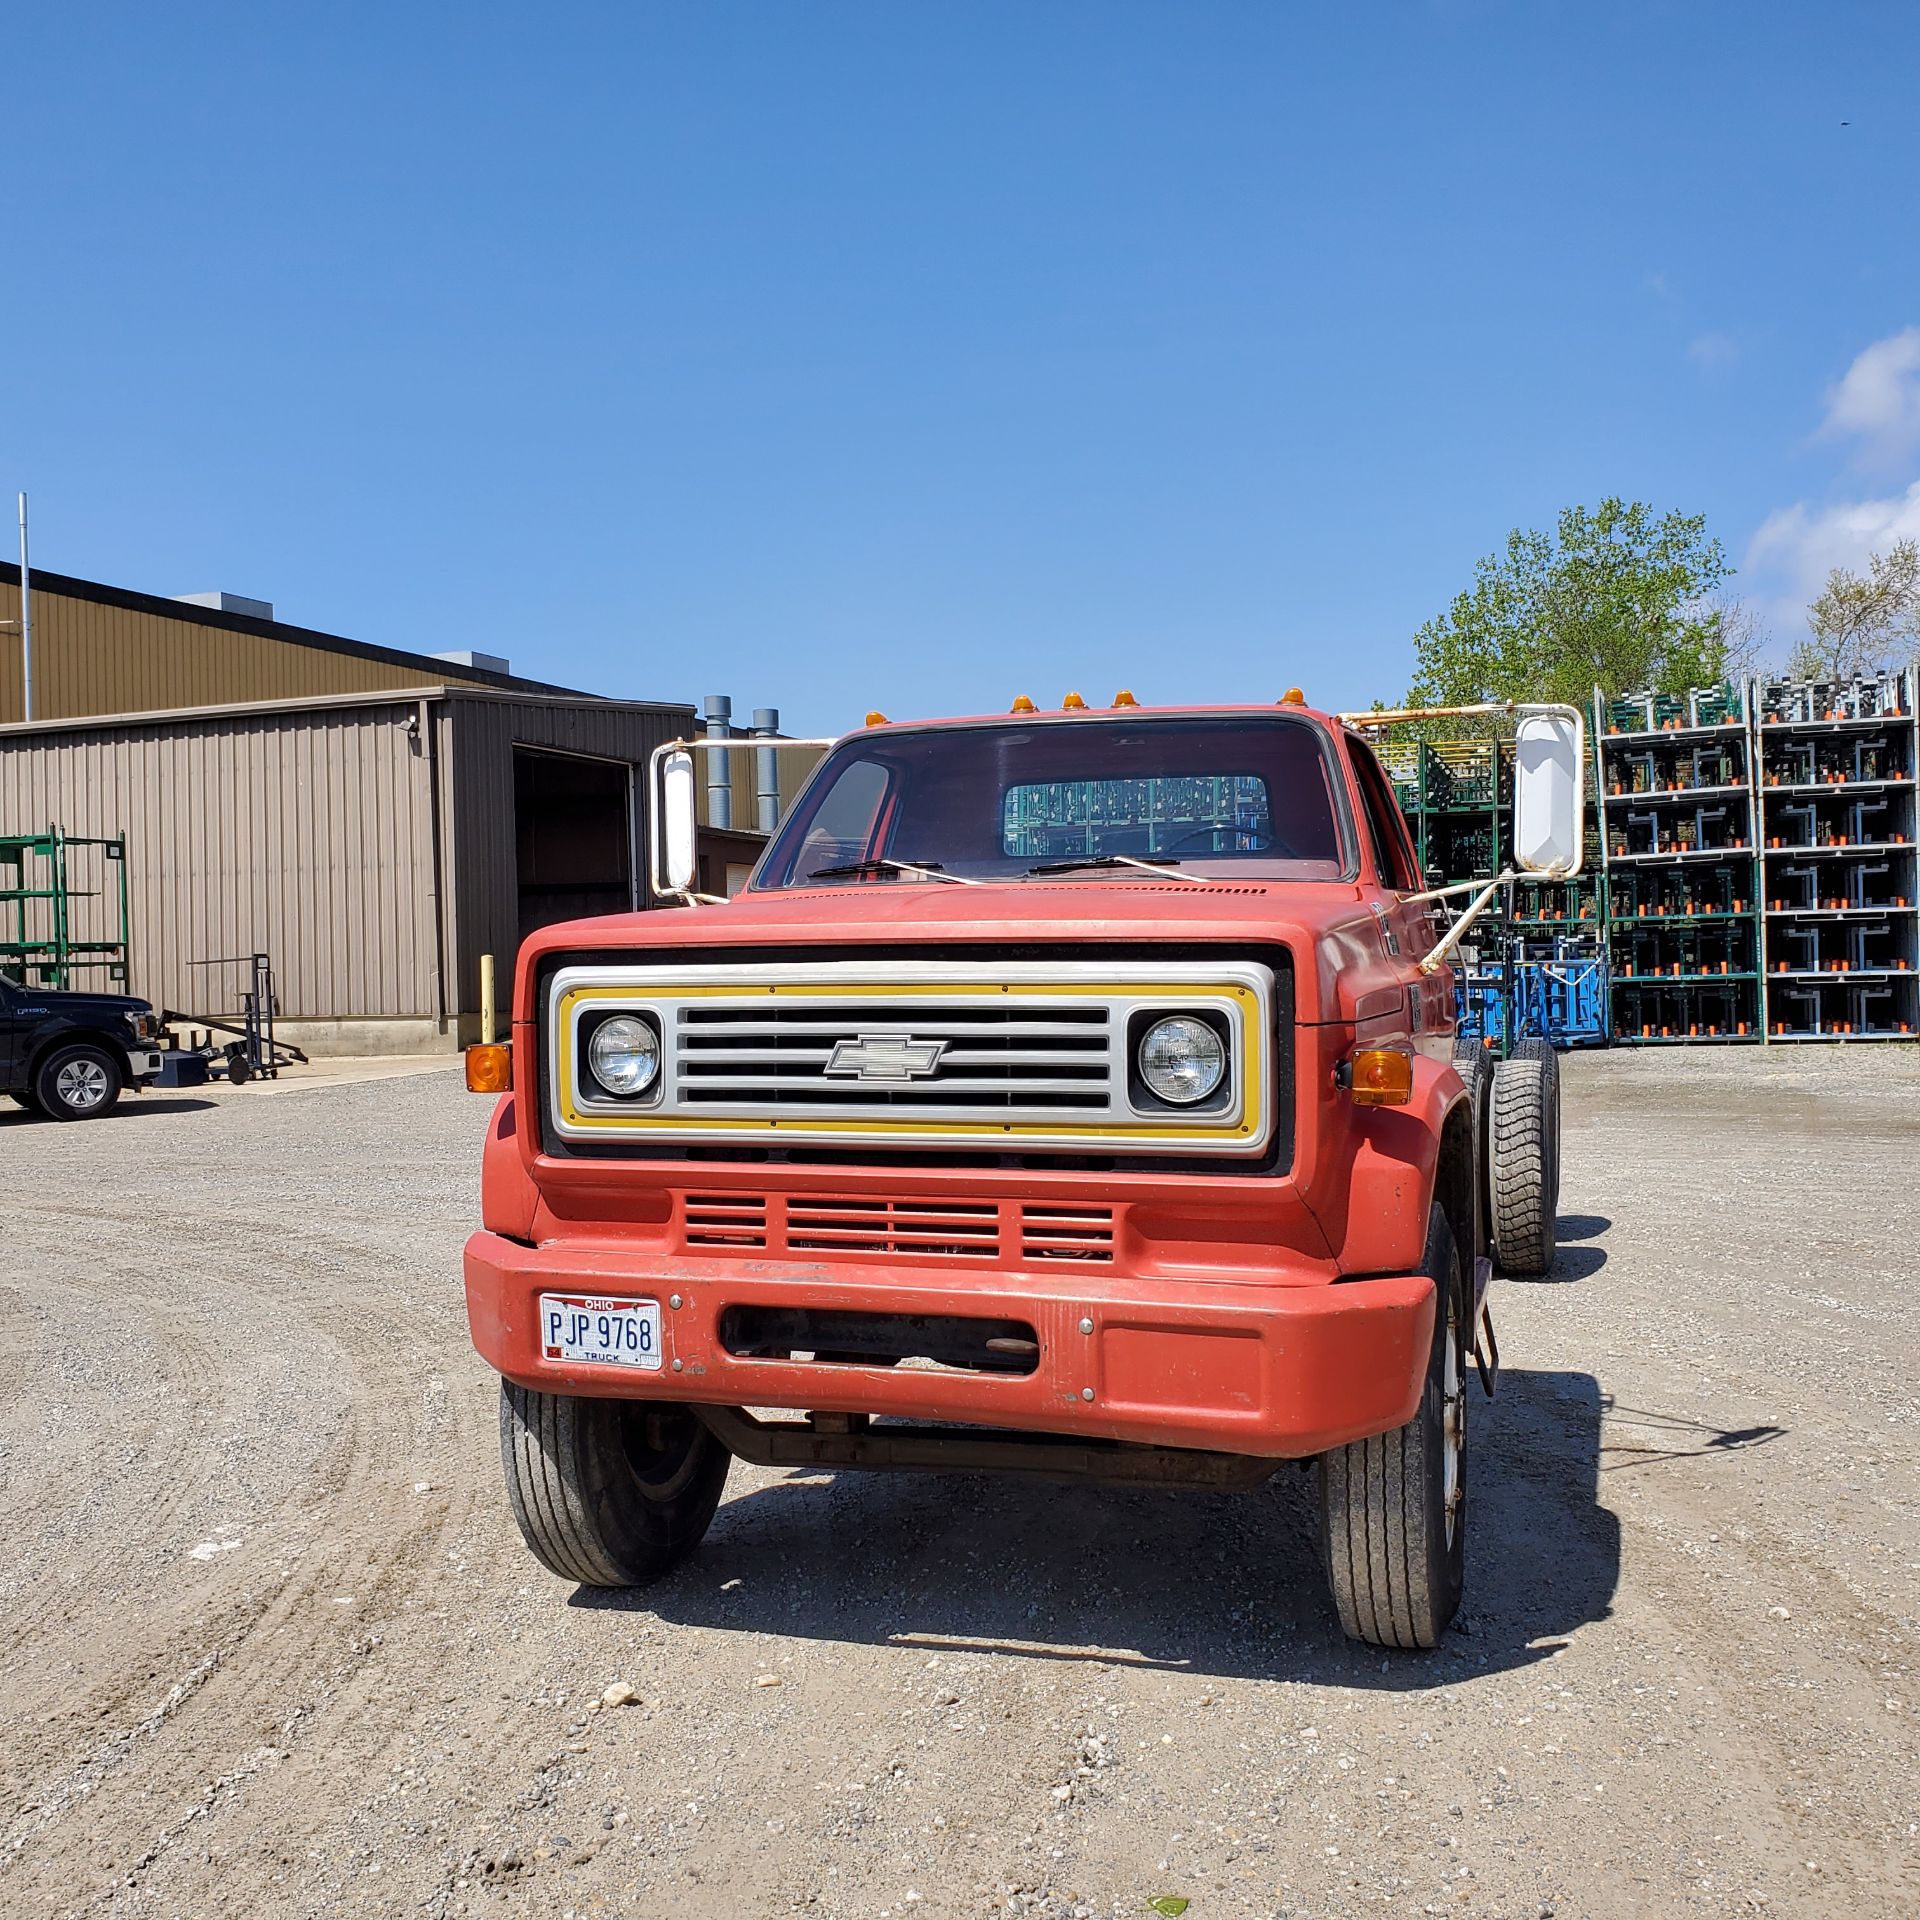 1977 Chevrolet C60 Cab and Chassis, Single Axle w/ Dual Tires and Tag Axle, 5 Speed Transmission - Image 2 of 19